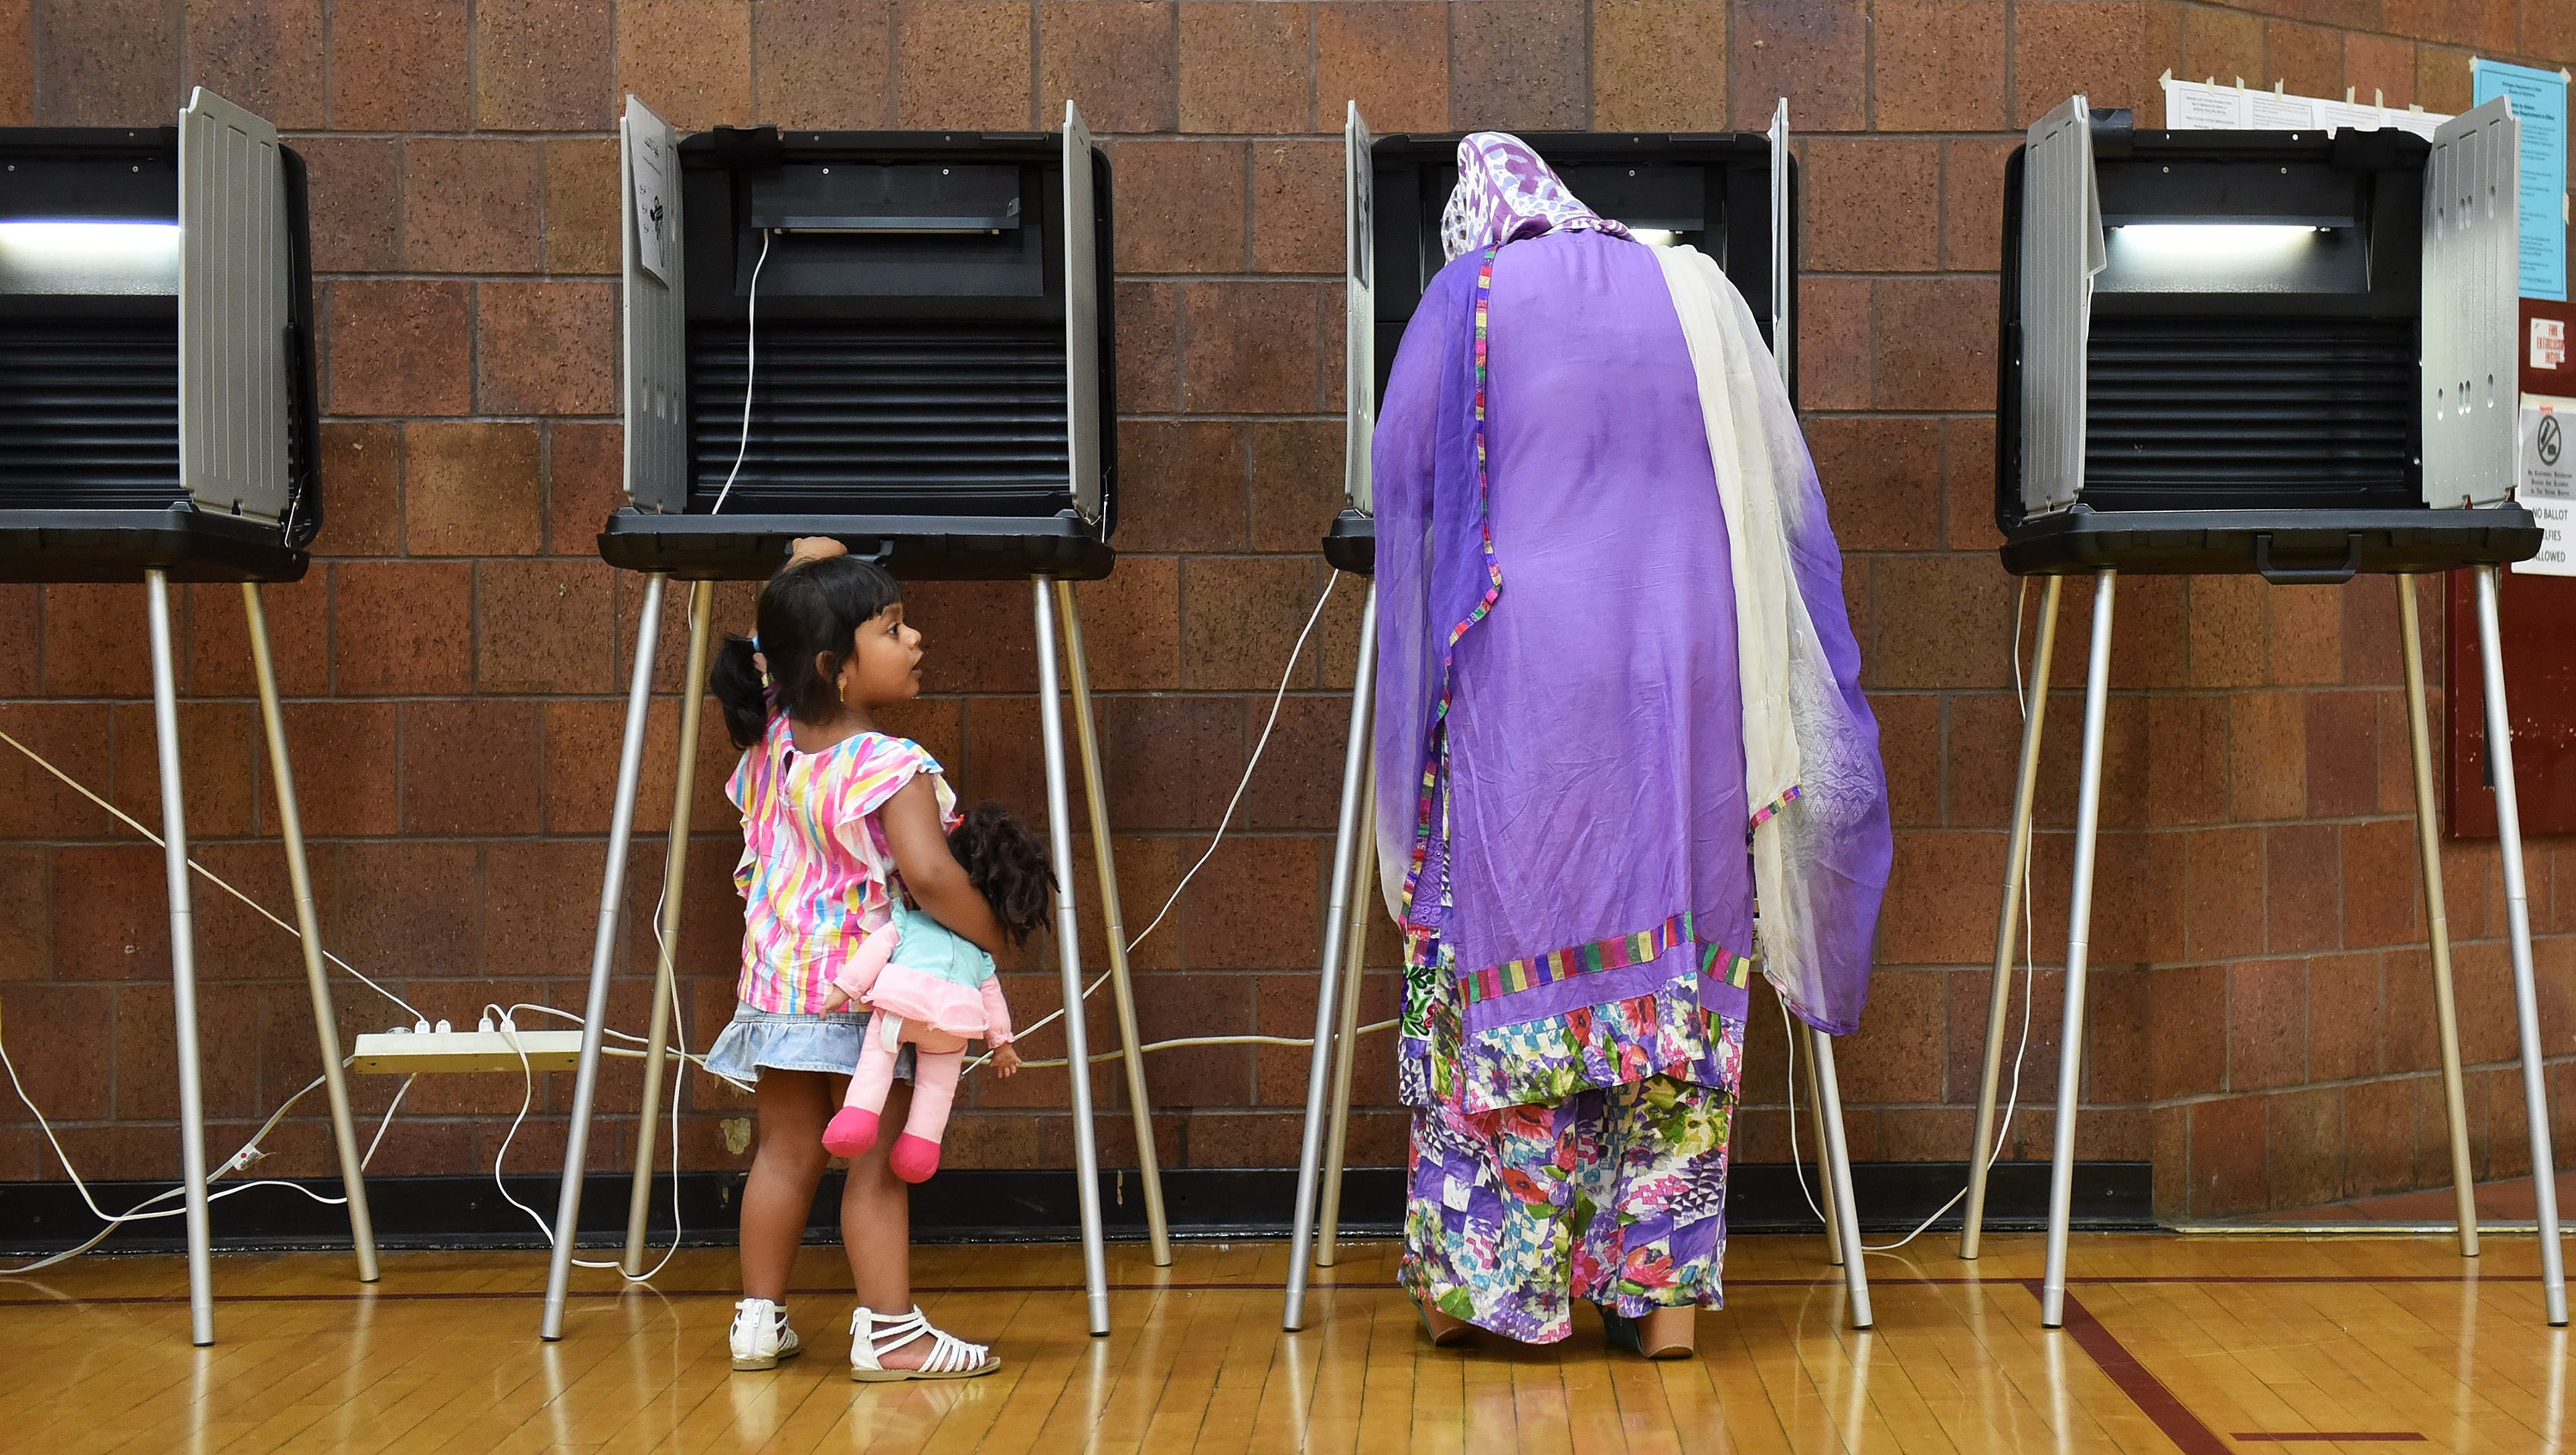 Farnaz Anaum, 3, looks at her mother, Farzana Akhter while she fills out her ballot for precinct 3 at the polling center at Hamtramck High School in Hamtramck, Mich. on Aug. 8, 2017.